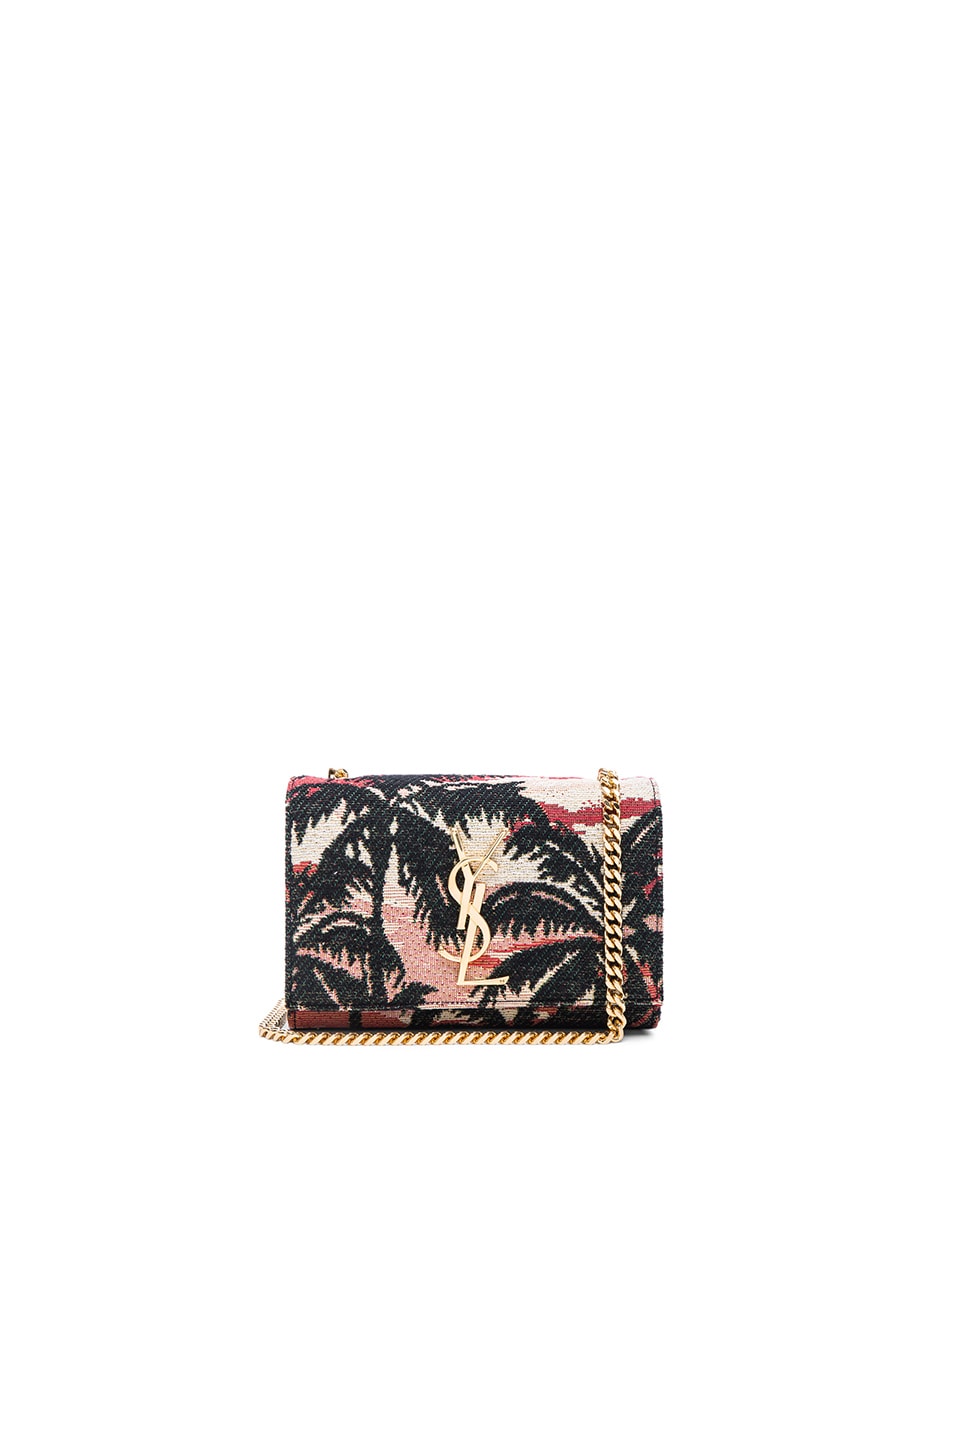 Image 1 of Saint Laurent Small Jacquard Monogramme Chain Bag in Red, Yellow & Black